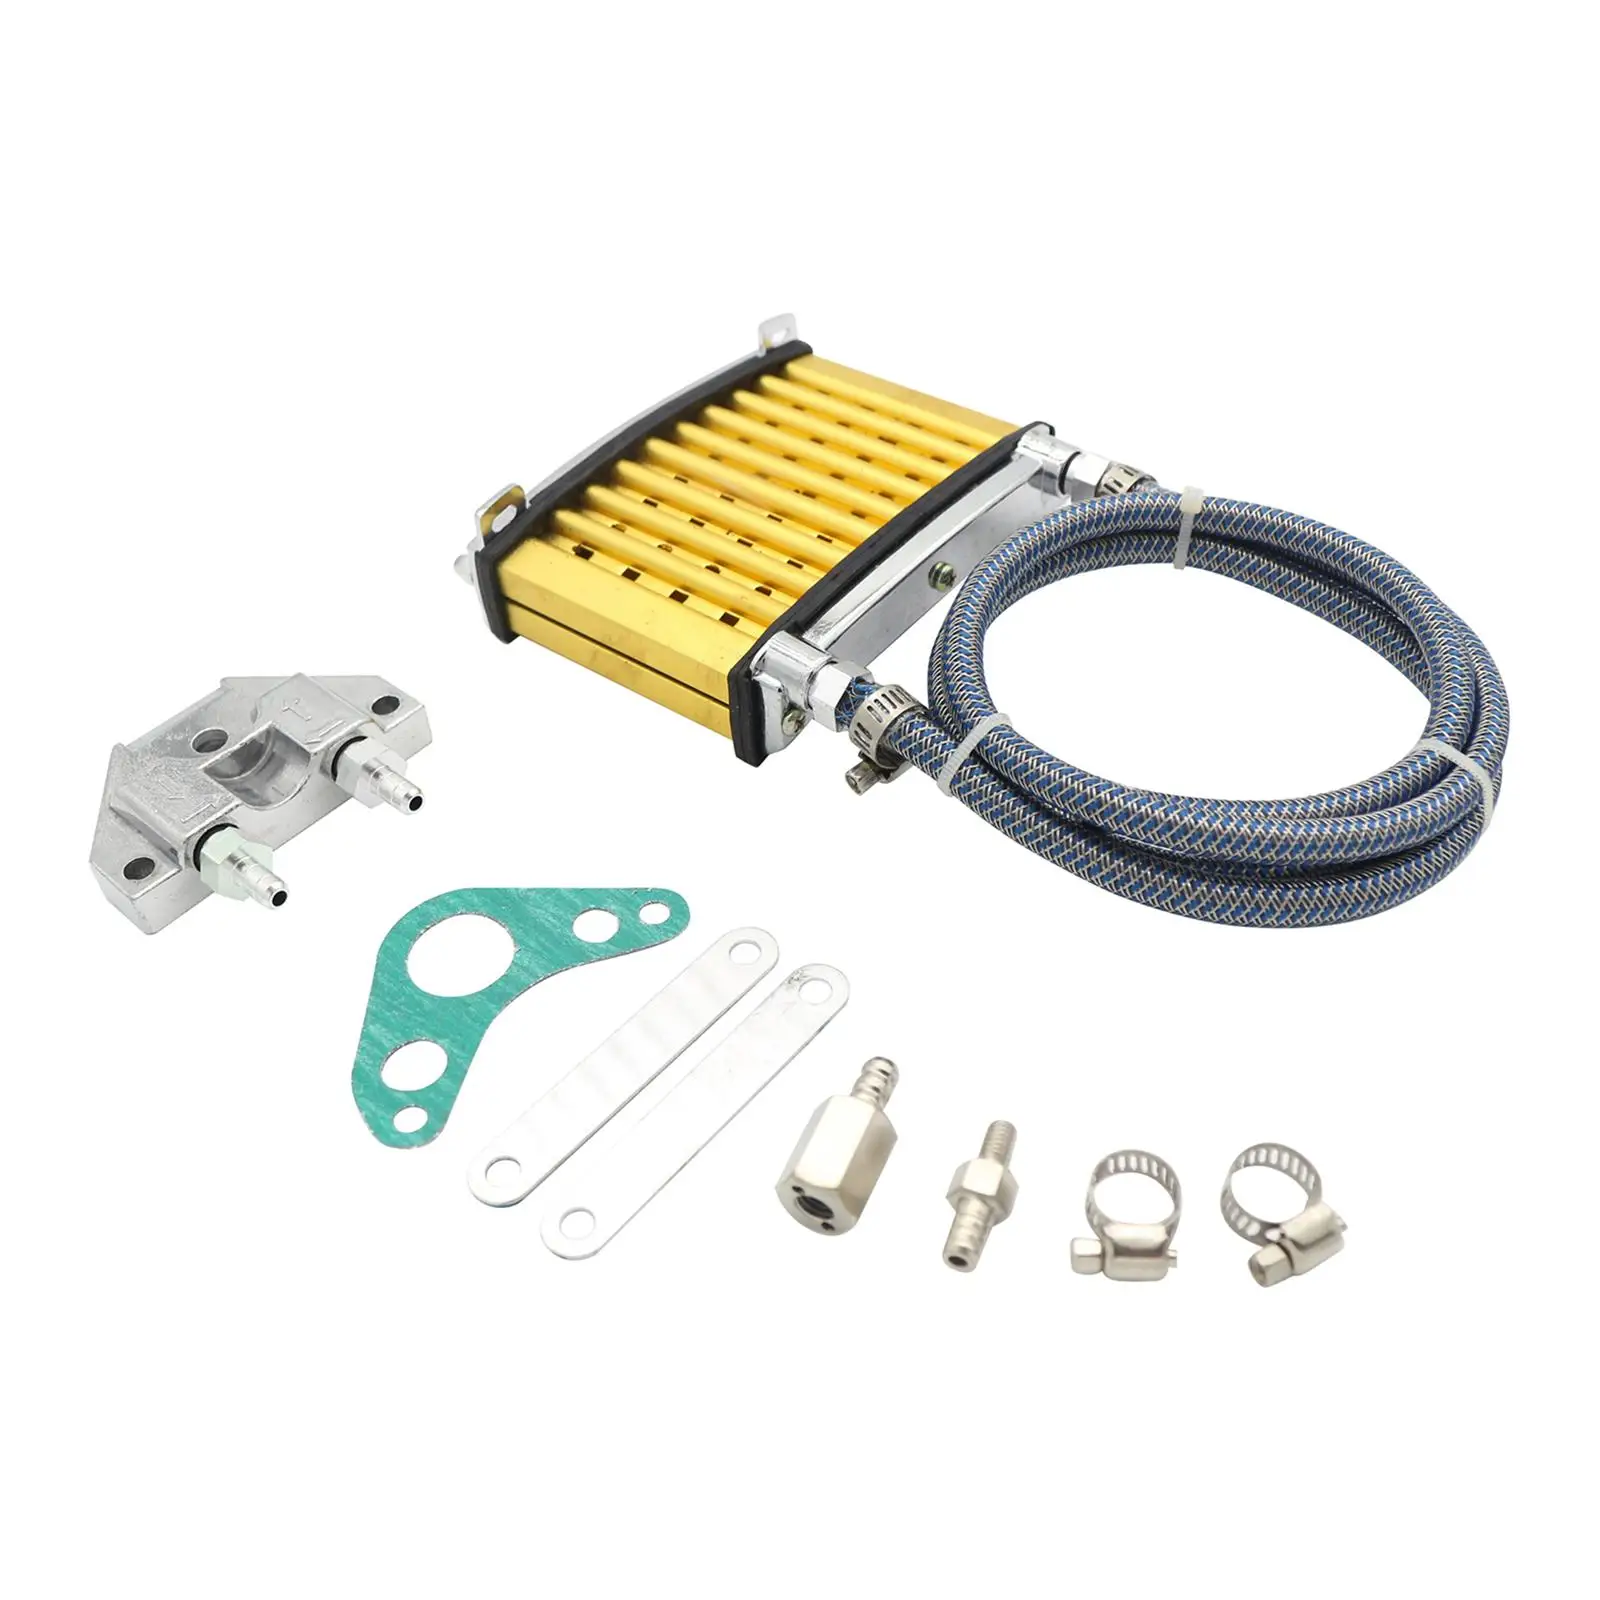 Motorbike Oil Cooler Radiator System Universal Modified Part for BMW 125cc 140cc 150cc